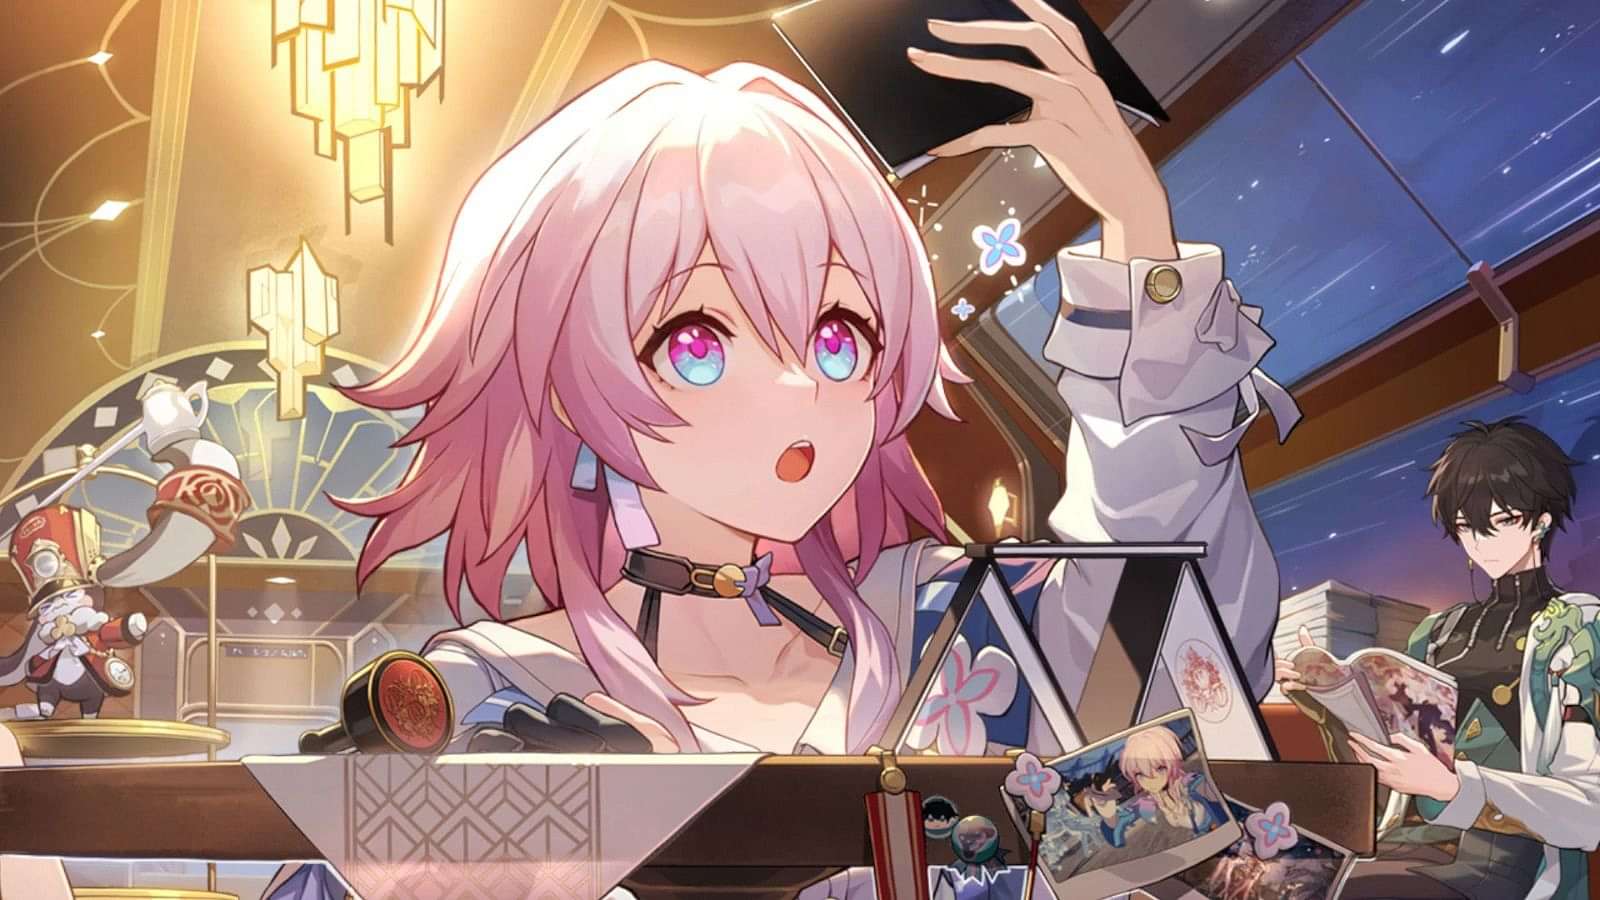 HONKAI STAR RAIL Don't forget Daily Check-in for Rewards! 